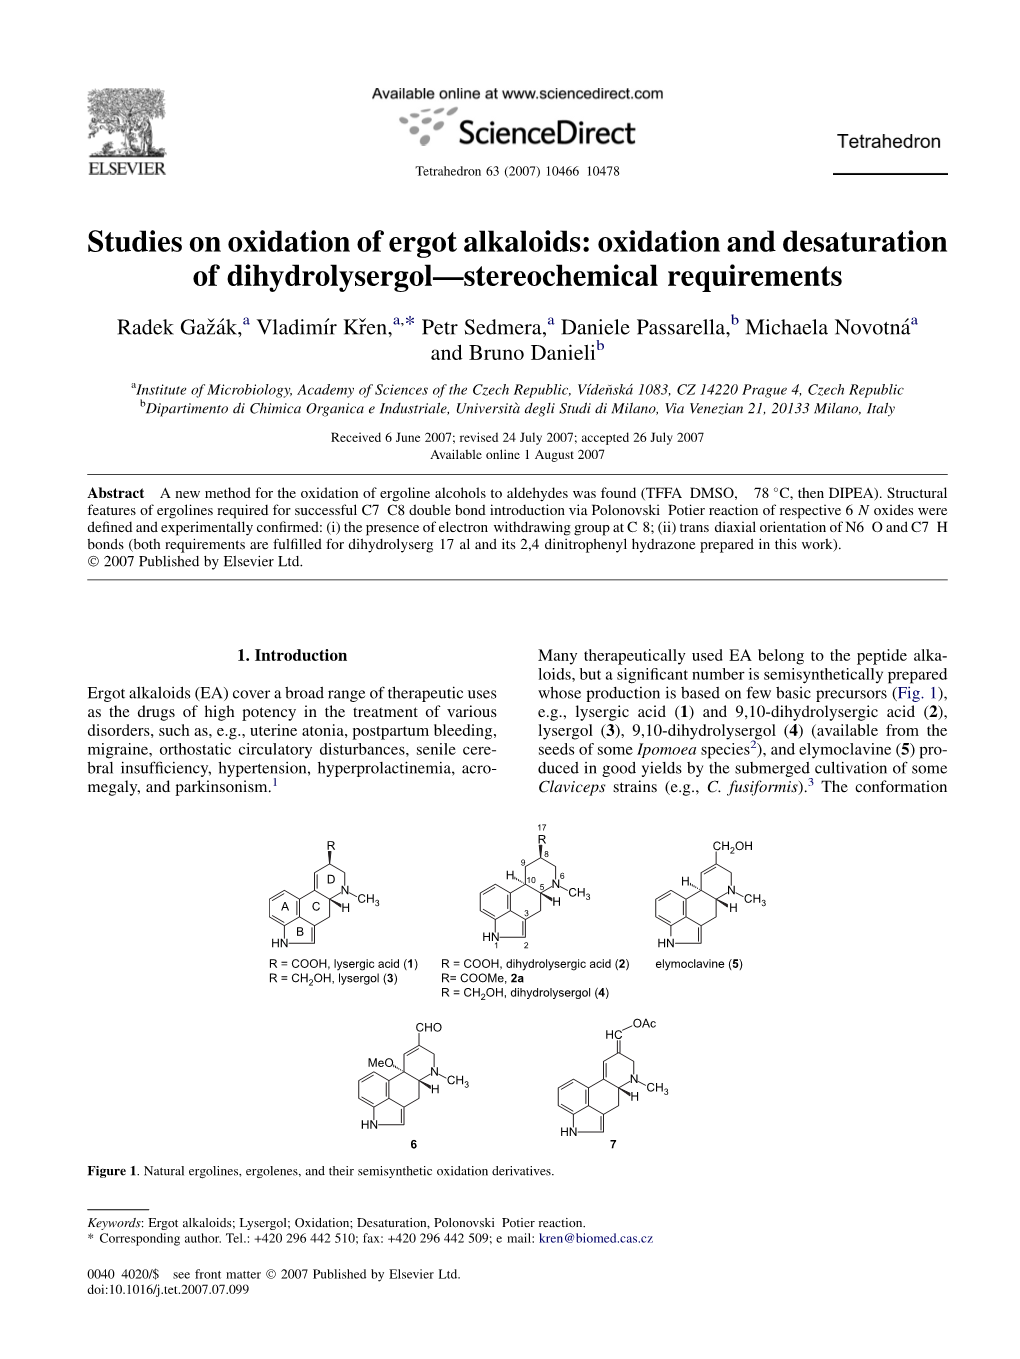 Studies on Oxidation of Ergot Alkaloids: Oxidation and Desaturation of Dihydrolysergol—Stereochemical Requirements